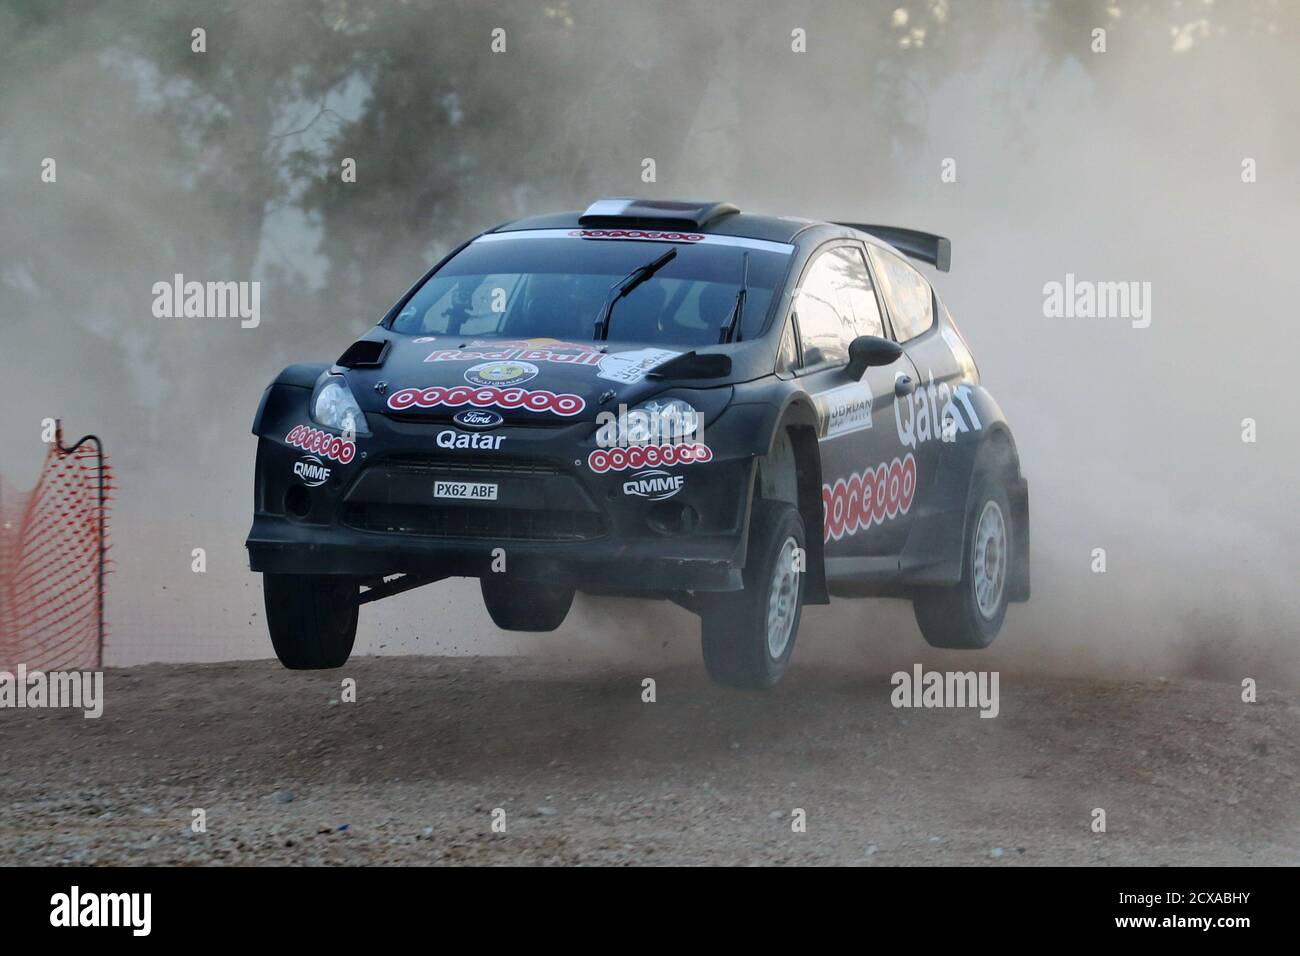 Nasser Saleh Al-Attiyah of Qatar and co-driver Giovanni Bernacchini drive their Ford Fiesta RRC during the gravel super special stage of the 2014 Jordan Rally, the third round of the Middle East Rally Championship (MERC), in Amman May 1, 2014. REUTERS/Muhammad Hamed (JORDAN - Tags: SPORT MOTORSPORT) Stock Photo